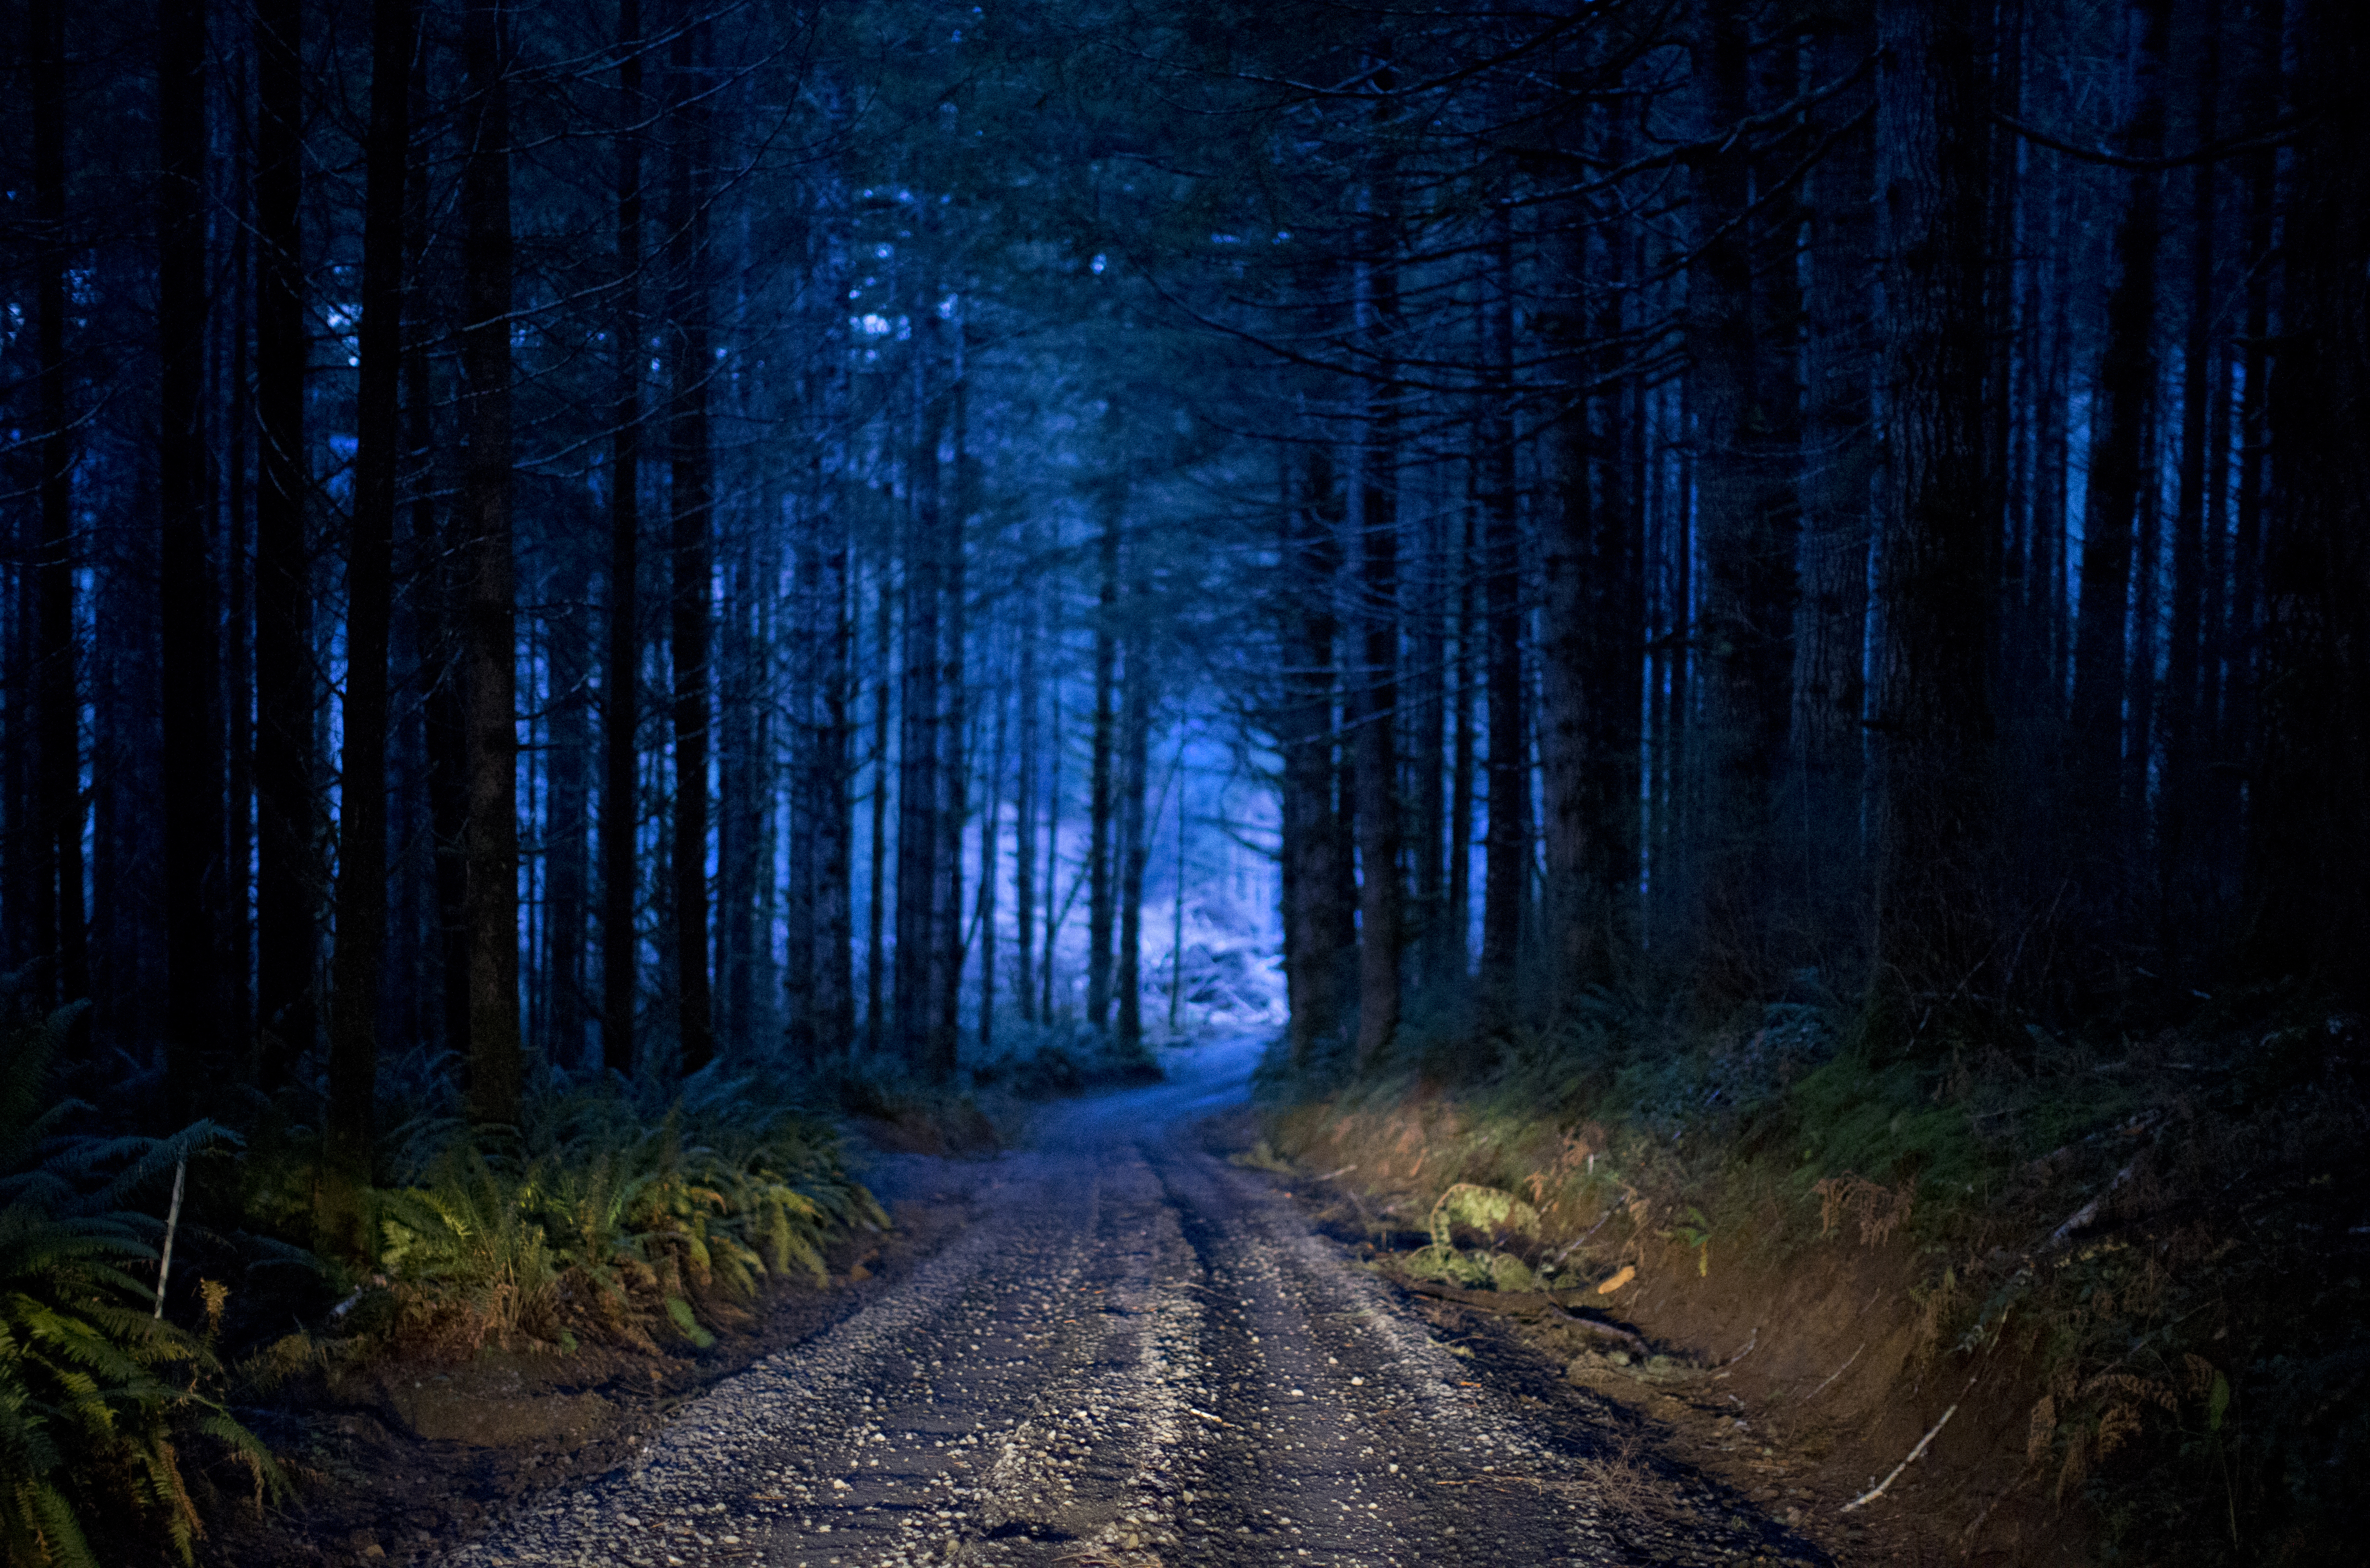 An old logging road just off Highway 20 on the Oregon coast near where Melissa Sanders and Sheila Swanson's bodies were discovered in 1992 by local hunters. Melissa and Sheila joined a list of girls last heard from or seen late at night in this coastal community. Decades later, their cold case murders were tied to suspected serial killer John Ackroyd.